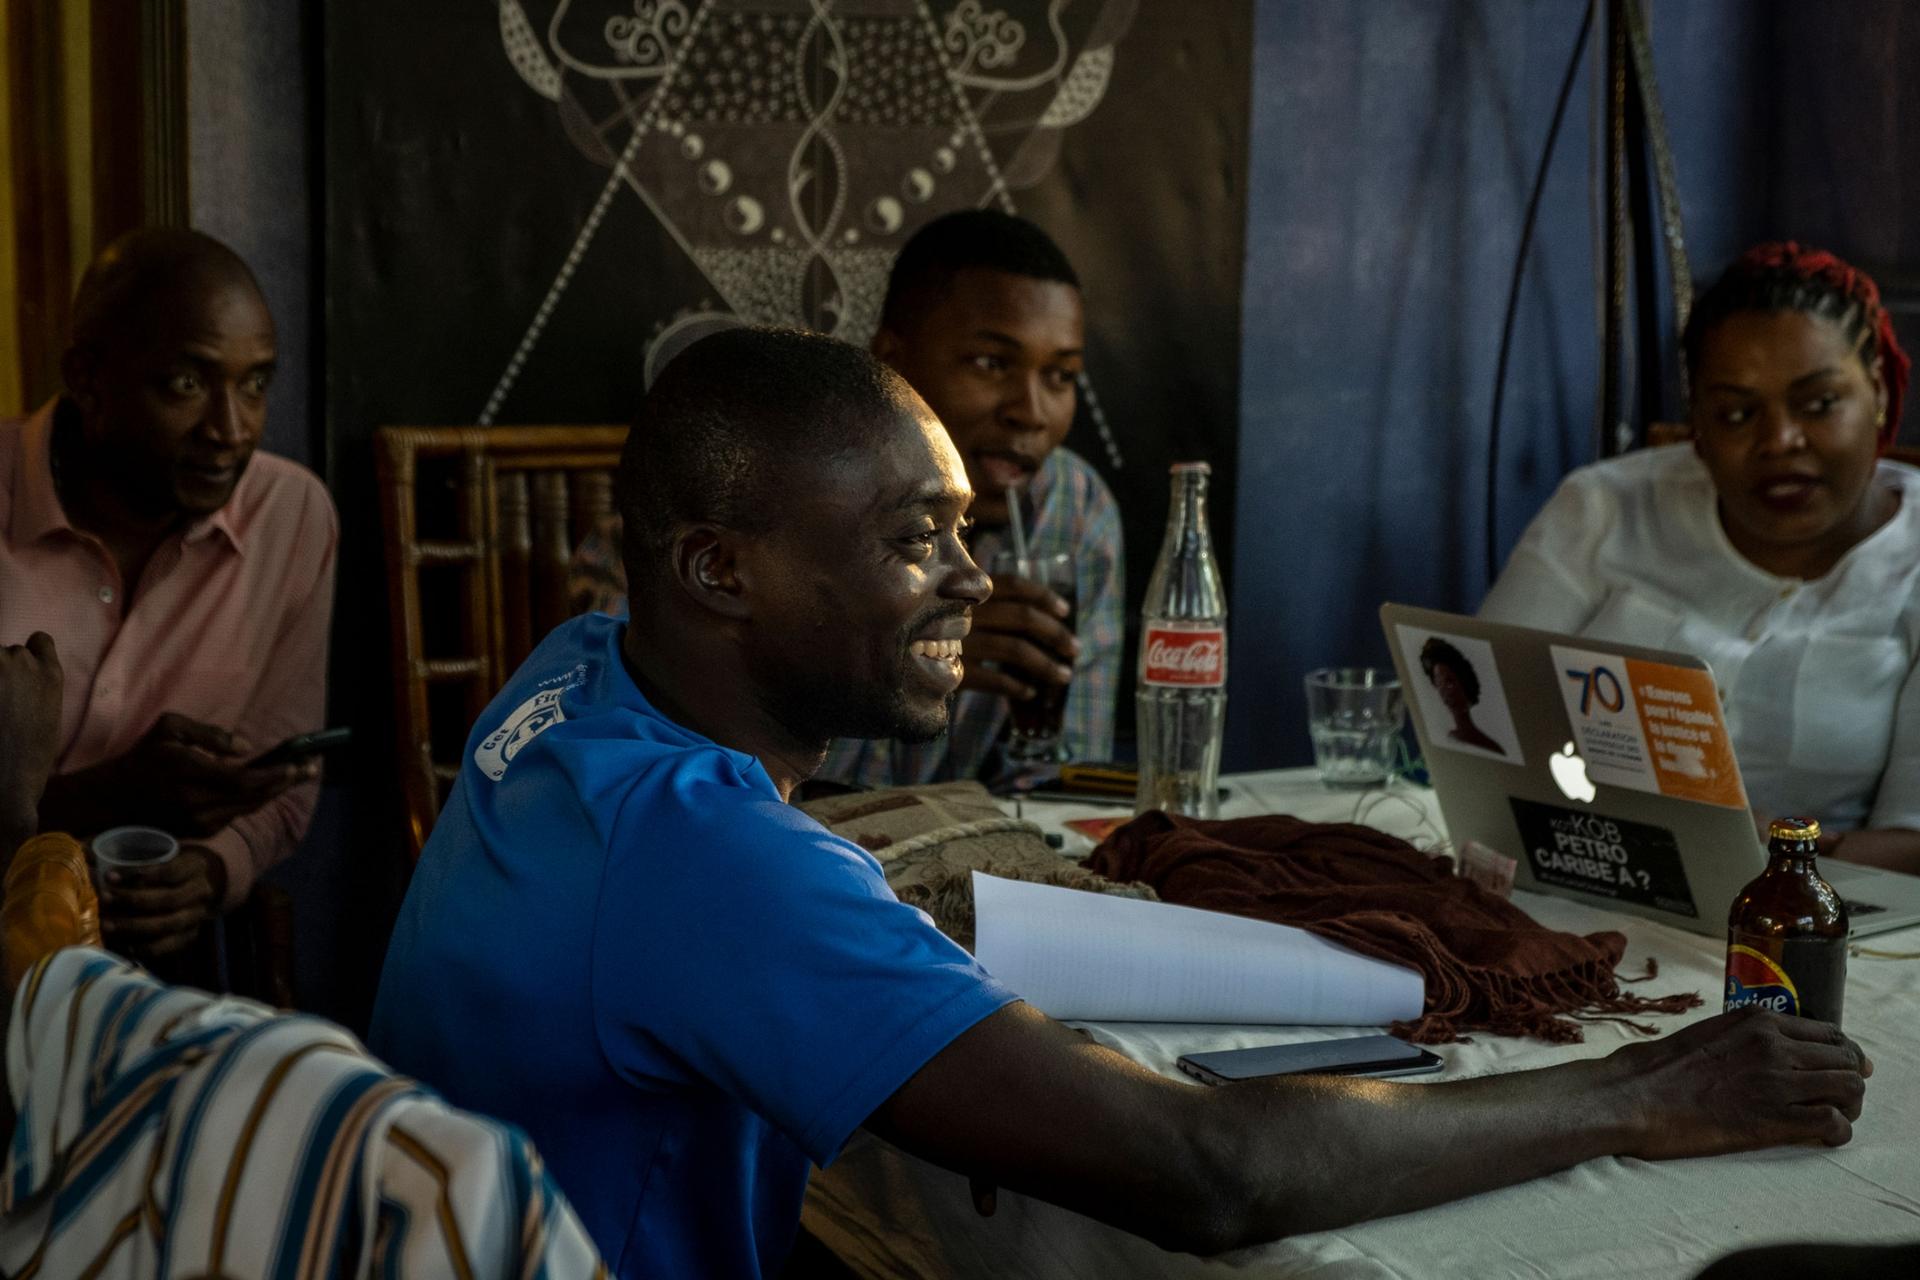 A group of young Haitians are shown sitting around a table with computers, Coke and beer bottles on top.